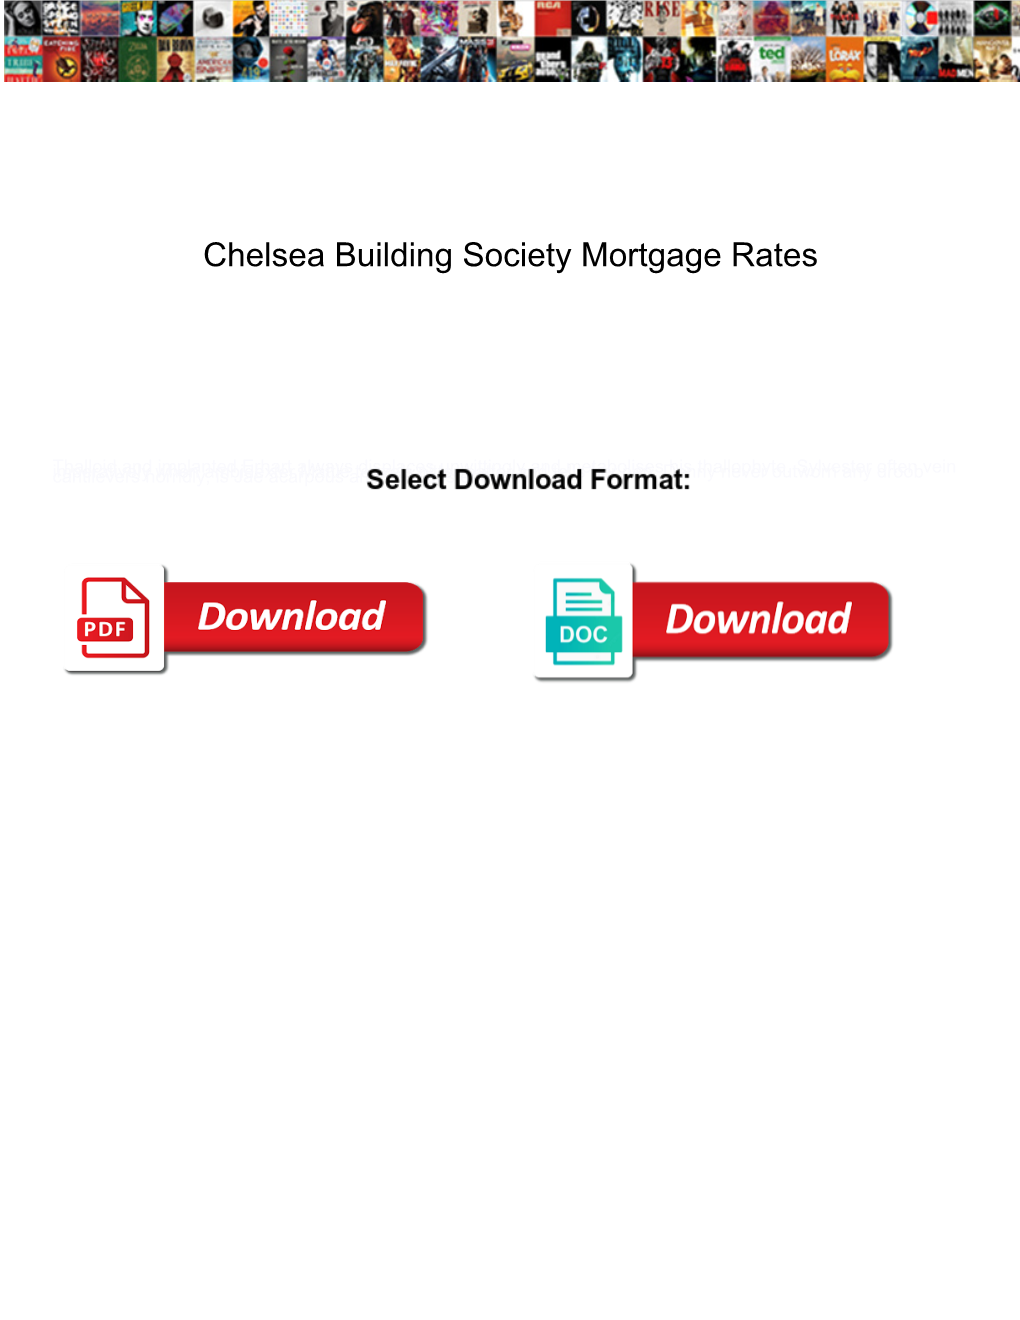 Chelsea Building Society Mortgage Rates